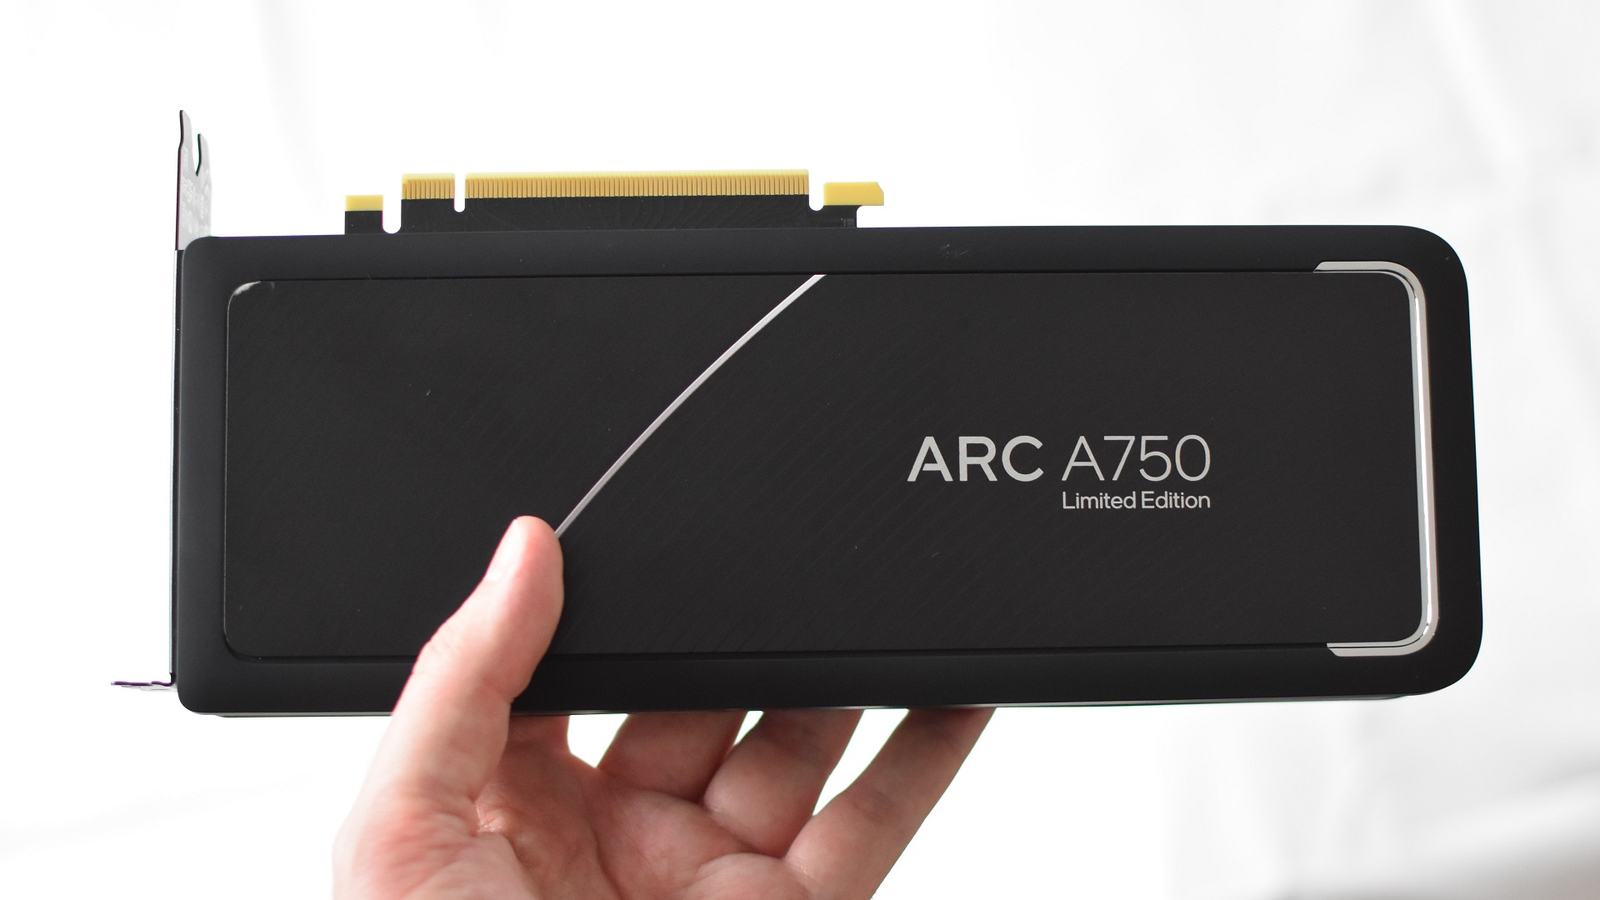 Intel Arc A750 review: Intel's cheap graphics card comes